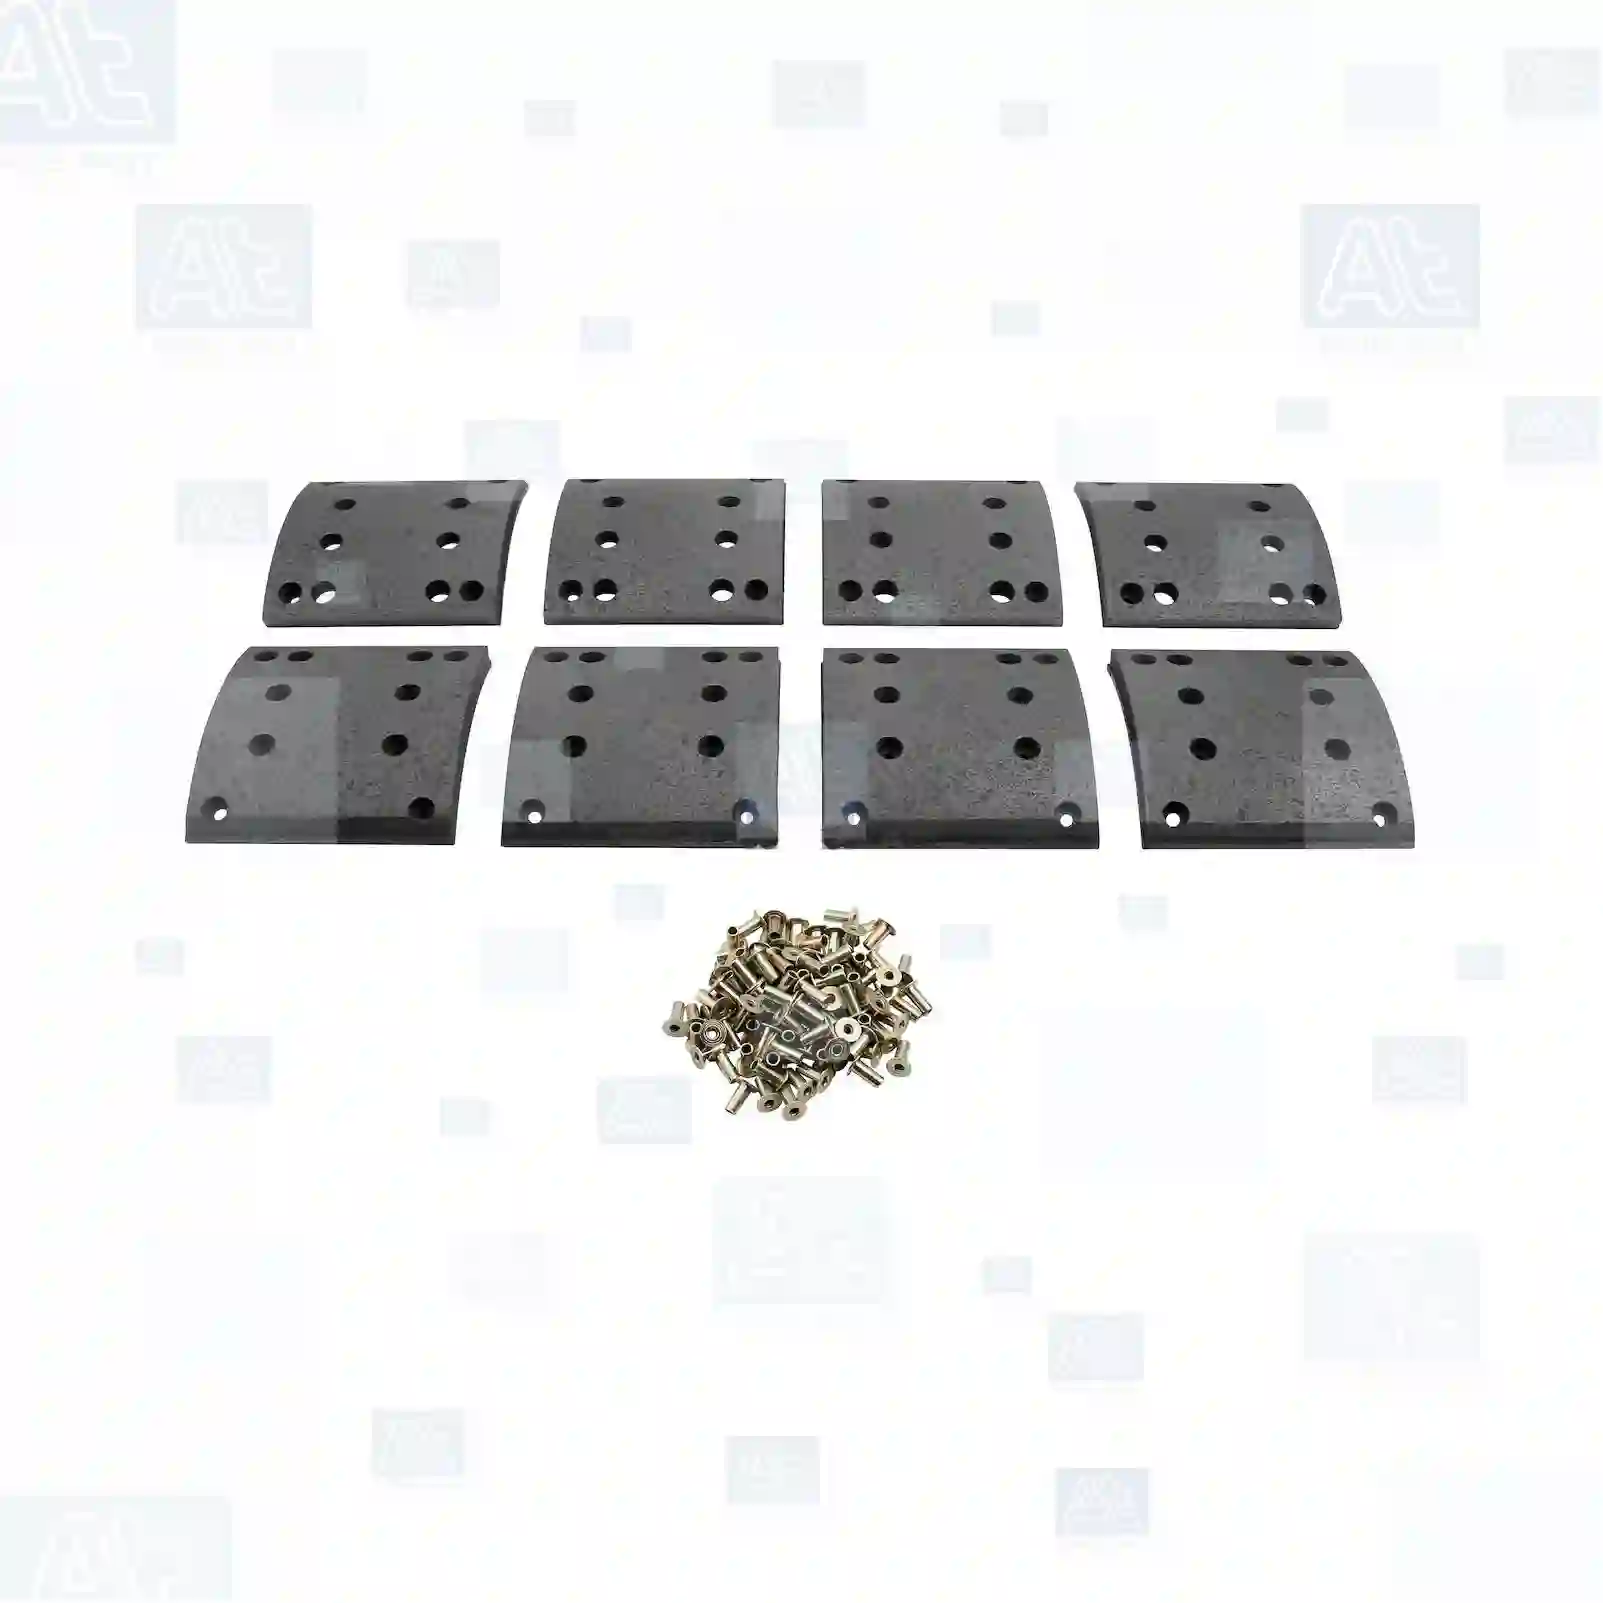 Drum brake lining kit, axle kit, 77714519, 81502200524, 81502200551, 81502200664, 81502200665, 81502210058, 81502210181, 81502210219, 81502210441, 81502210451, 81502210526, 81502210645, 81502210771, 81502210784, 81502210809, 81502210850, 81502210855, 81502210906, 81502210908, 81502210949, 81502216077, 81502216097, 81502216114, 0004211530, 3464239610, 6174231111, 6174231211, 6174231330, 6174232711, 6174235110, 6174235111, 6174235911, 6174236011, 6174236311, 6174236411, 6174237111, 6174239311, 6594232510, 6594234110, MBLK2200, 2V5698511A, ZG50450-0008 ||  77714519 At Spare Part | Engine, Accelerator Pedal, Camshaft, Connecting Rod, Crankcase, Crankshaft, Cylinder Head, Engine Suspension Mountings, Exhaust Manifold, Exhaust Gas Recirculation, Filter Kits, Flywheel Housing, General Overhaul Kits, Engine, Intake Manifold, Oil Cleaner, Oil Cooler, Oil Filter, Oil Pump, Oil Sump, Piston & Liner, Sensor & Switch, Timing Case, Turbocharger, Cooling System, Belt Tensioner, Coolant Filter, Coolant Pipe, Corrosion Prevention Agent, Drive, Expansion Tank, Fan, Intercooler, Monitors & Gauges, Radiator, Thermostat, V-Belt / Timing belt, Water Pump, Fuel System, Electronical Injector Unit, Feed Pump, Fuel Filter, cpl., Fuel Gauge Sender,  Fuel Line, Fuel Pump, Fuel Tank, Injection Line Kit, Injection Pump, Exhaust System, Clutch & Pedal, Gearbox, Propeller Shaft, Axles, Brake System, Hubs & Wheels, Suspension, Leaf Spring, Universal Parts / Accessories, Steering, Electrical System, Cabin Drum brake lining kit, axle kit, 77714519, 81502200524, 81502200551, 81502200664, 81502200665, 81502210058, 81502210181, 81502210219, 81502210441, 81502210451, 81502210526, 81502210645, 81502210771, 81502210784, 81502210809, 81502210850, 81502210855, 81502210906, 81502210908, 81502210949, 81502216077, 81502216097, 81502216114, 0004211530, 3464239610, 6174231111, 6174231211, 6174231330, 6174232711, 6174235110, 6174235111, 6174235911, 6174236011, 6174236311, 6174236411, 6174237111, 6174239311, 6594232510, 6594234110, MBLK2200, 2V5698511A, ZG50450-0008 ||  77714519 At Spare Part | Engine, Accelerator Pedal, Camshaft, Connecting Rod, Crankcase, Crankshaft, Cylinder Head, Engine Suspension Mountings, Exhaust Manifold, Exhaust Gas Recirculation, Filter Kits, Flywheel Housing, General Overhaul Kits, Engine, Intake Manifold, Oil Cleaner, Oil Cooler, Oil Filter, Oil Pump, Oil Sump, Piston & Liner, Sensor & Switch, Timing Case, Turbocharger, Cooling System, Belt Tensioner, Coolant Filter, Coolant Pipe, Corrosion Prevention Agent, Drive, Expansion Tank, Fan, Intercooler, Monitors & Gauges, Radiator, Thermostat, V-Belt / Timing belt, Water Pump, Fuel System, Electronical Injector Unit, Feed Pump, Fuel Filter, cpl., Fuel Gauge Sender,  Fuel Line, Fuel Pump, Fuel Tank, Injection Line Kit, Injection Pump, Exhaust System, Clutch & Pedal, Gearbox, Propeller Shaft, Axles, Brake System, Hubs & Wheels, Suspension, Leaf Spring, Universal Parts / Accessories, Steering, Electrical System, Cabin